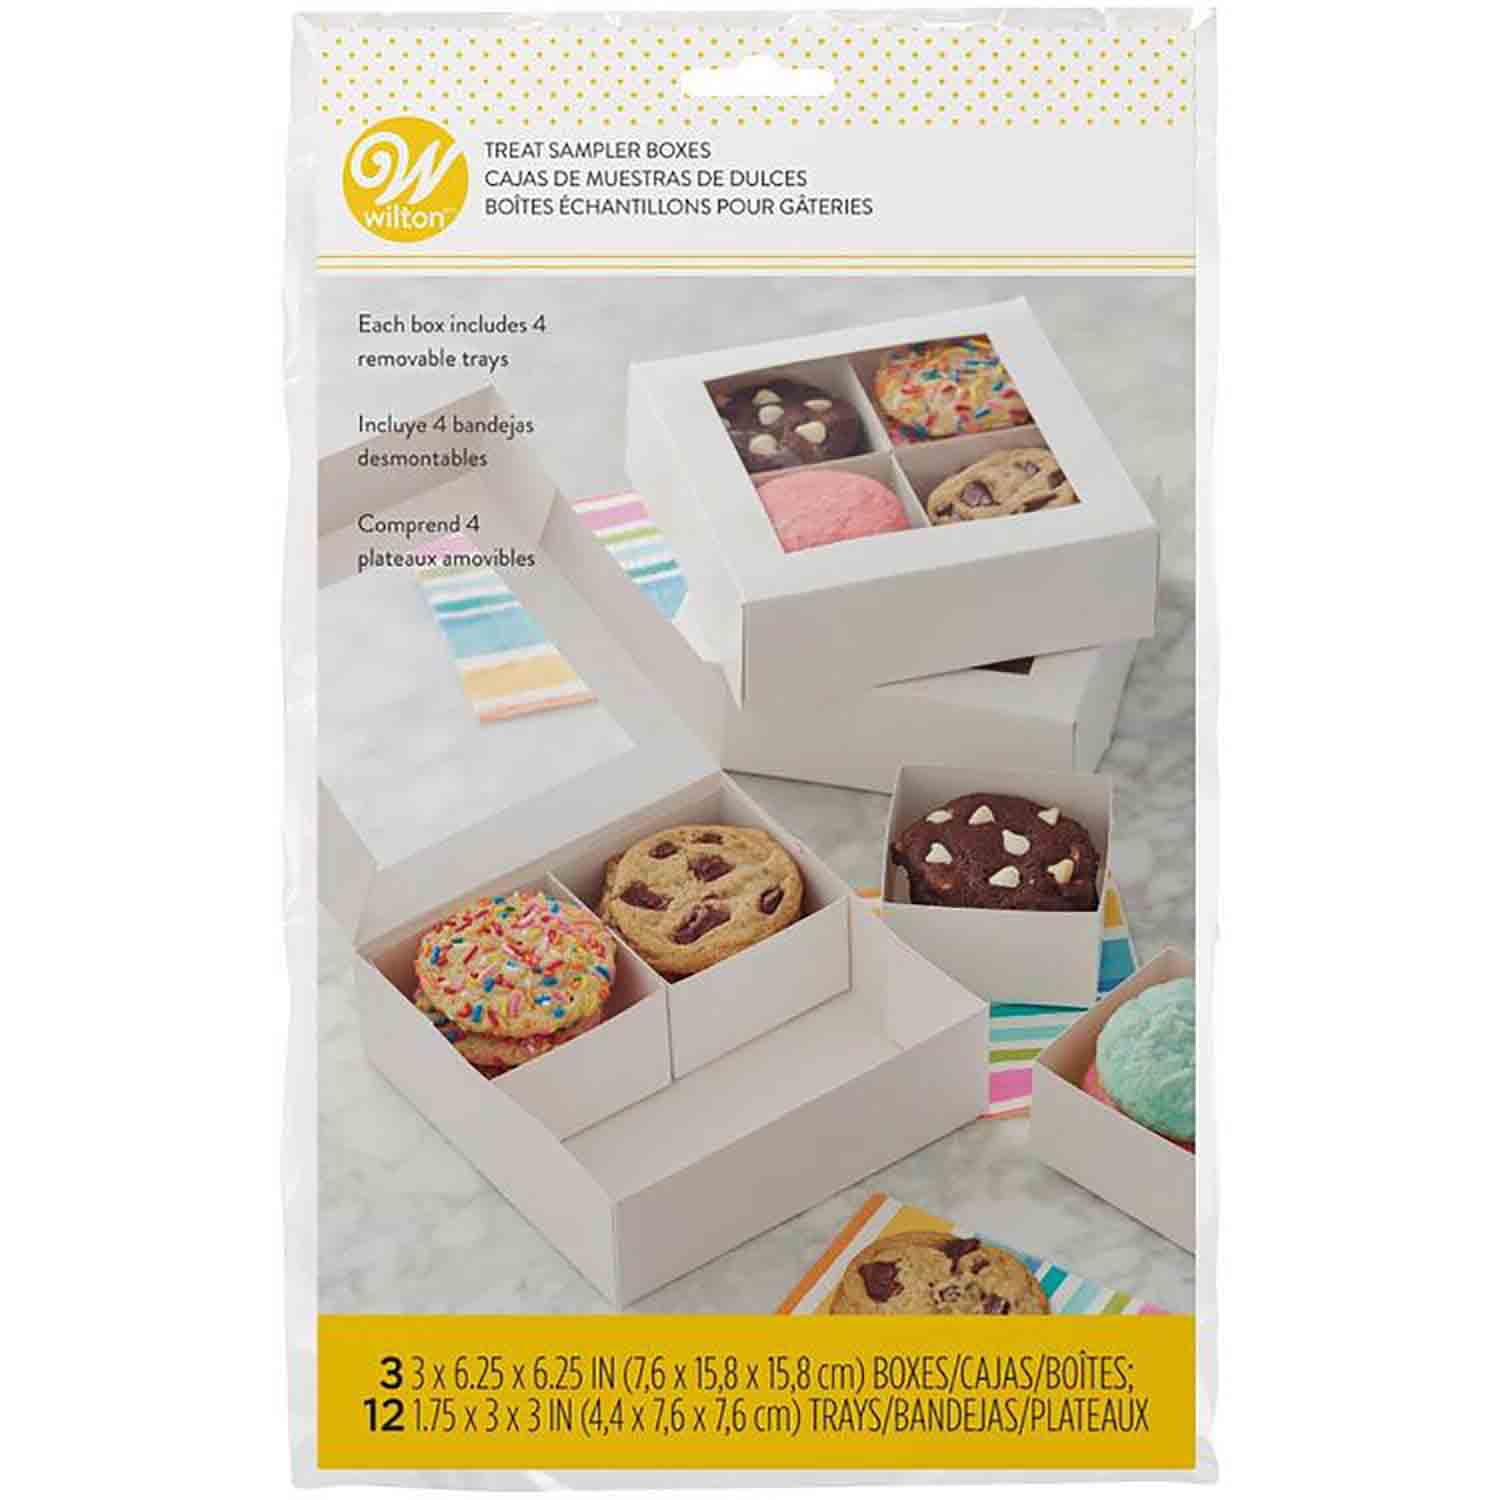 Shop Cakesicle Boxes: Single Cakesicle Boxes, Clear Boxes and Sets